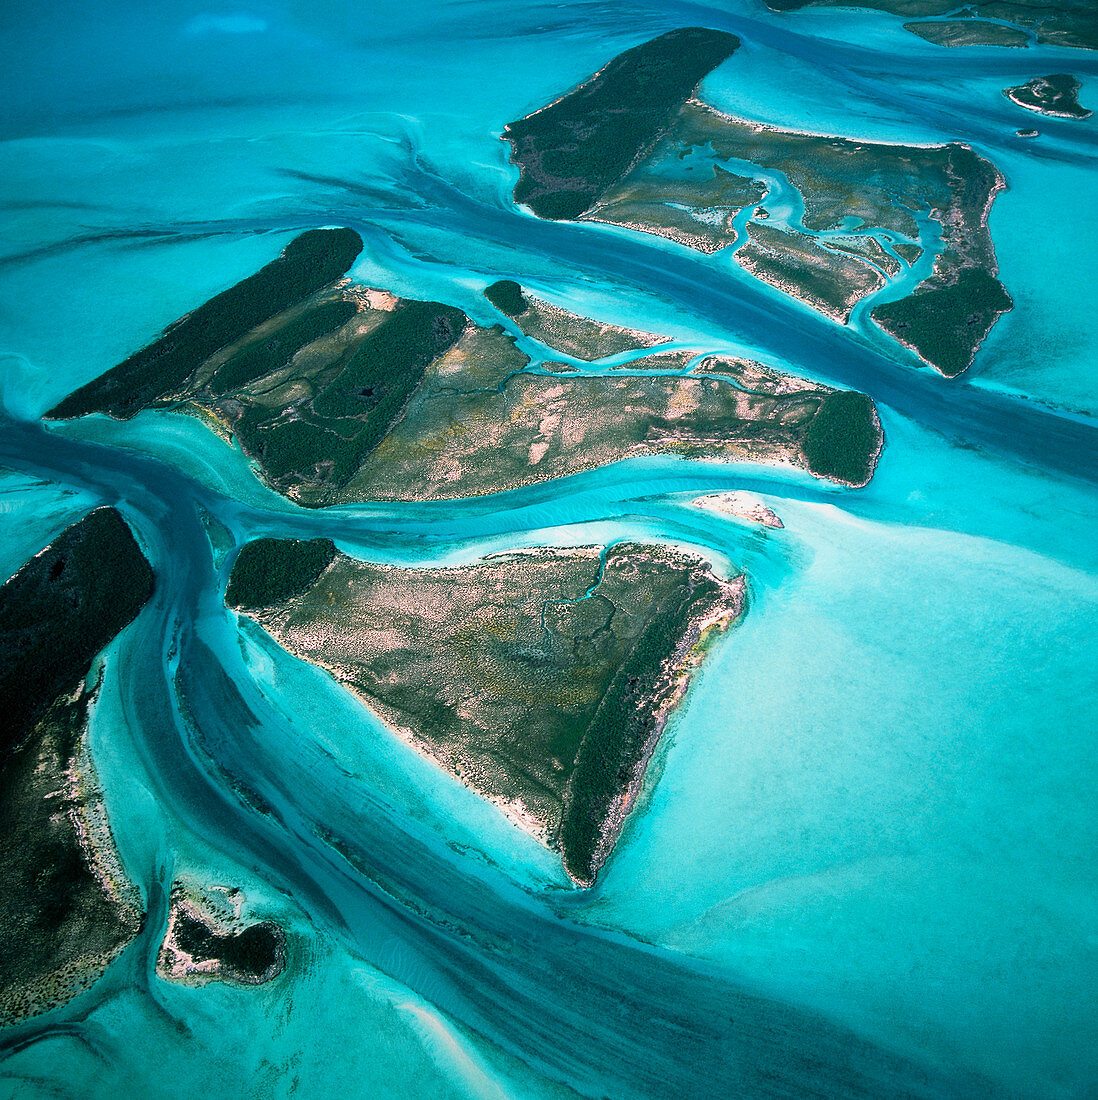 View of the Exuma Cays islands on the Bahama Bank